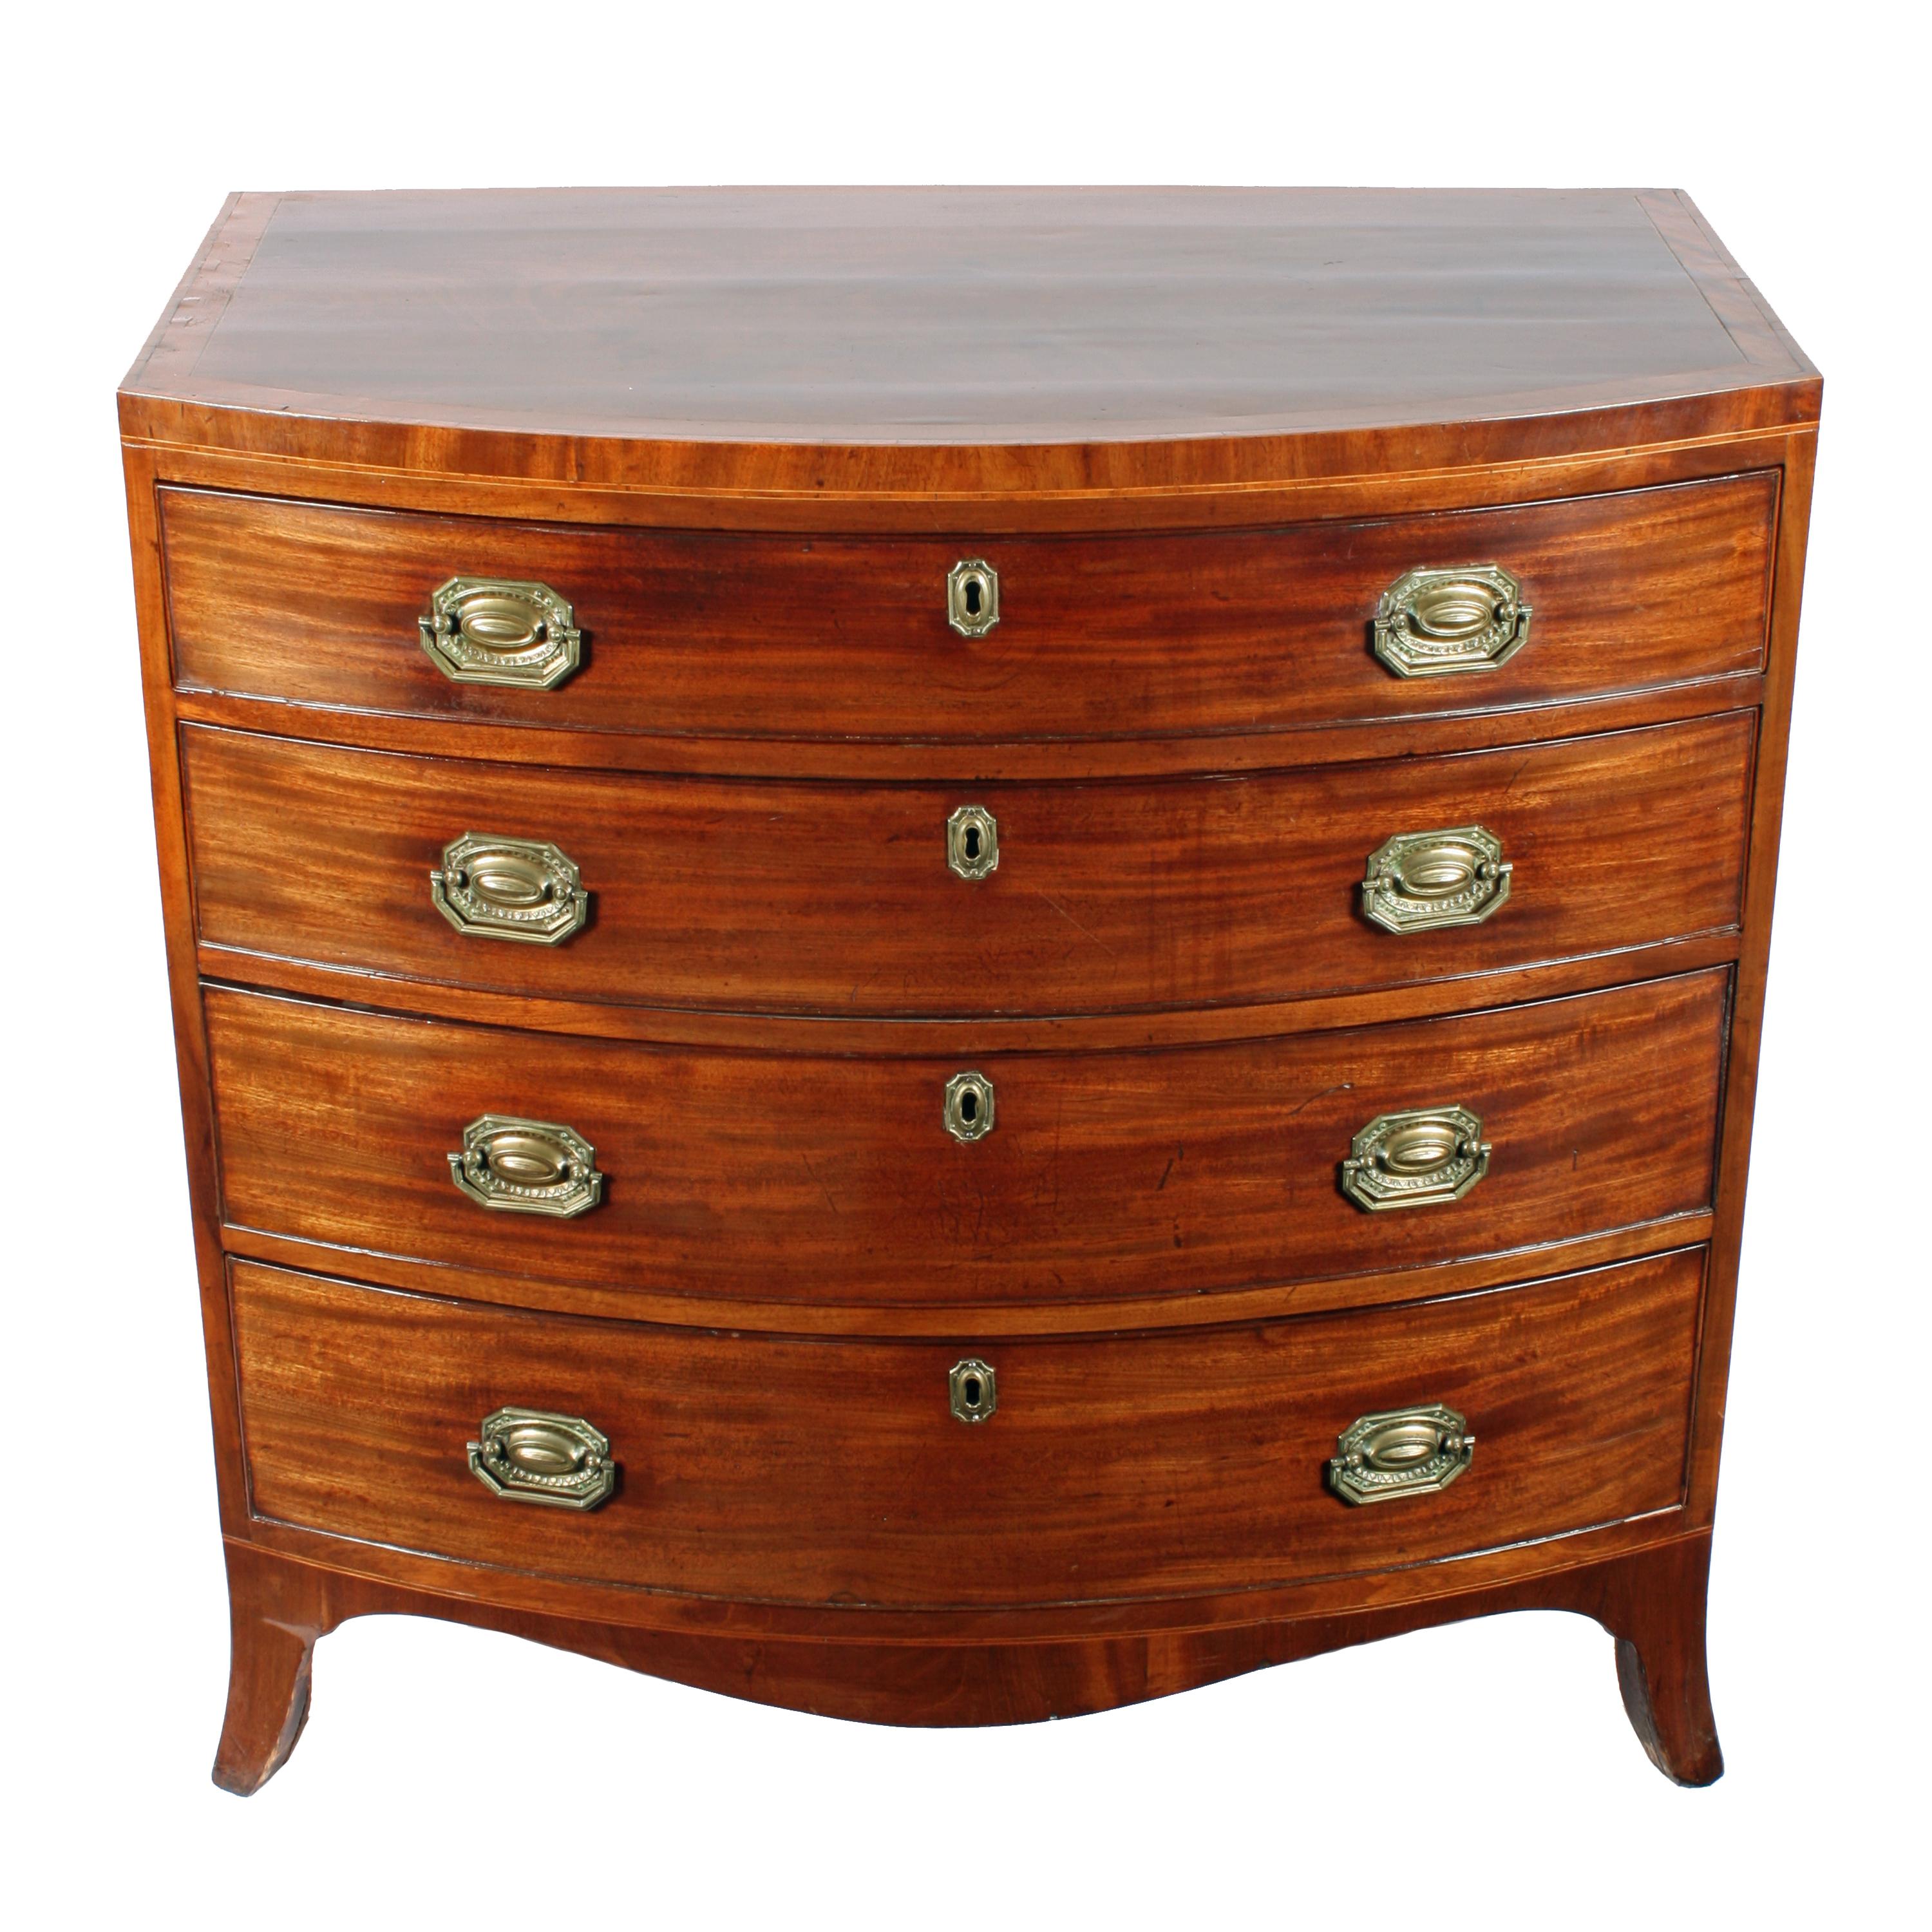 Georgian Hepplewhite bow front chest


A Georgian mahogany bow fronted Hepplewhite chest of drawers.

The chest has a satinwood and kingwood cross banded top with box wood and ebony line inlays.

The chest has four graduated drawers that are